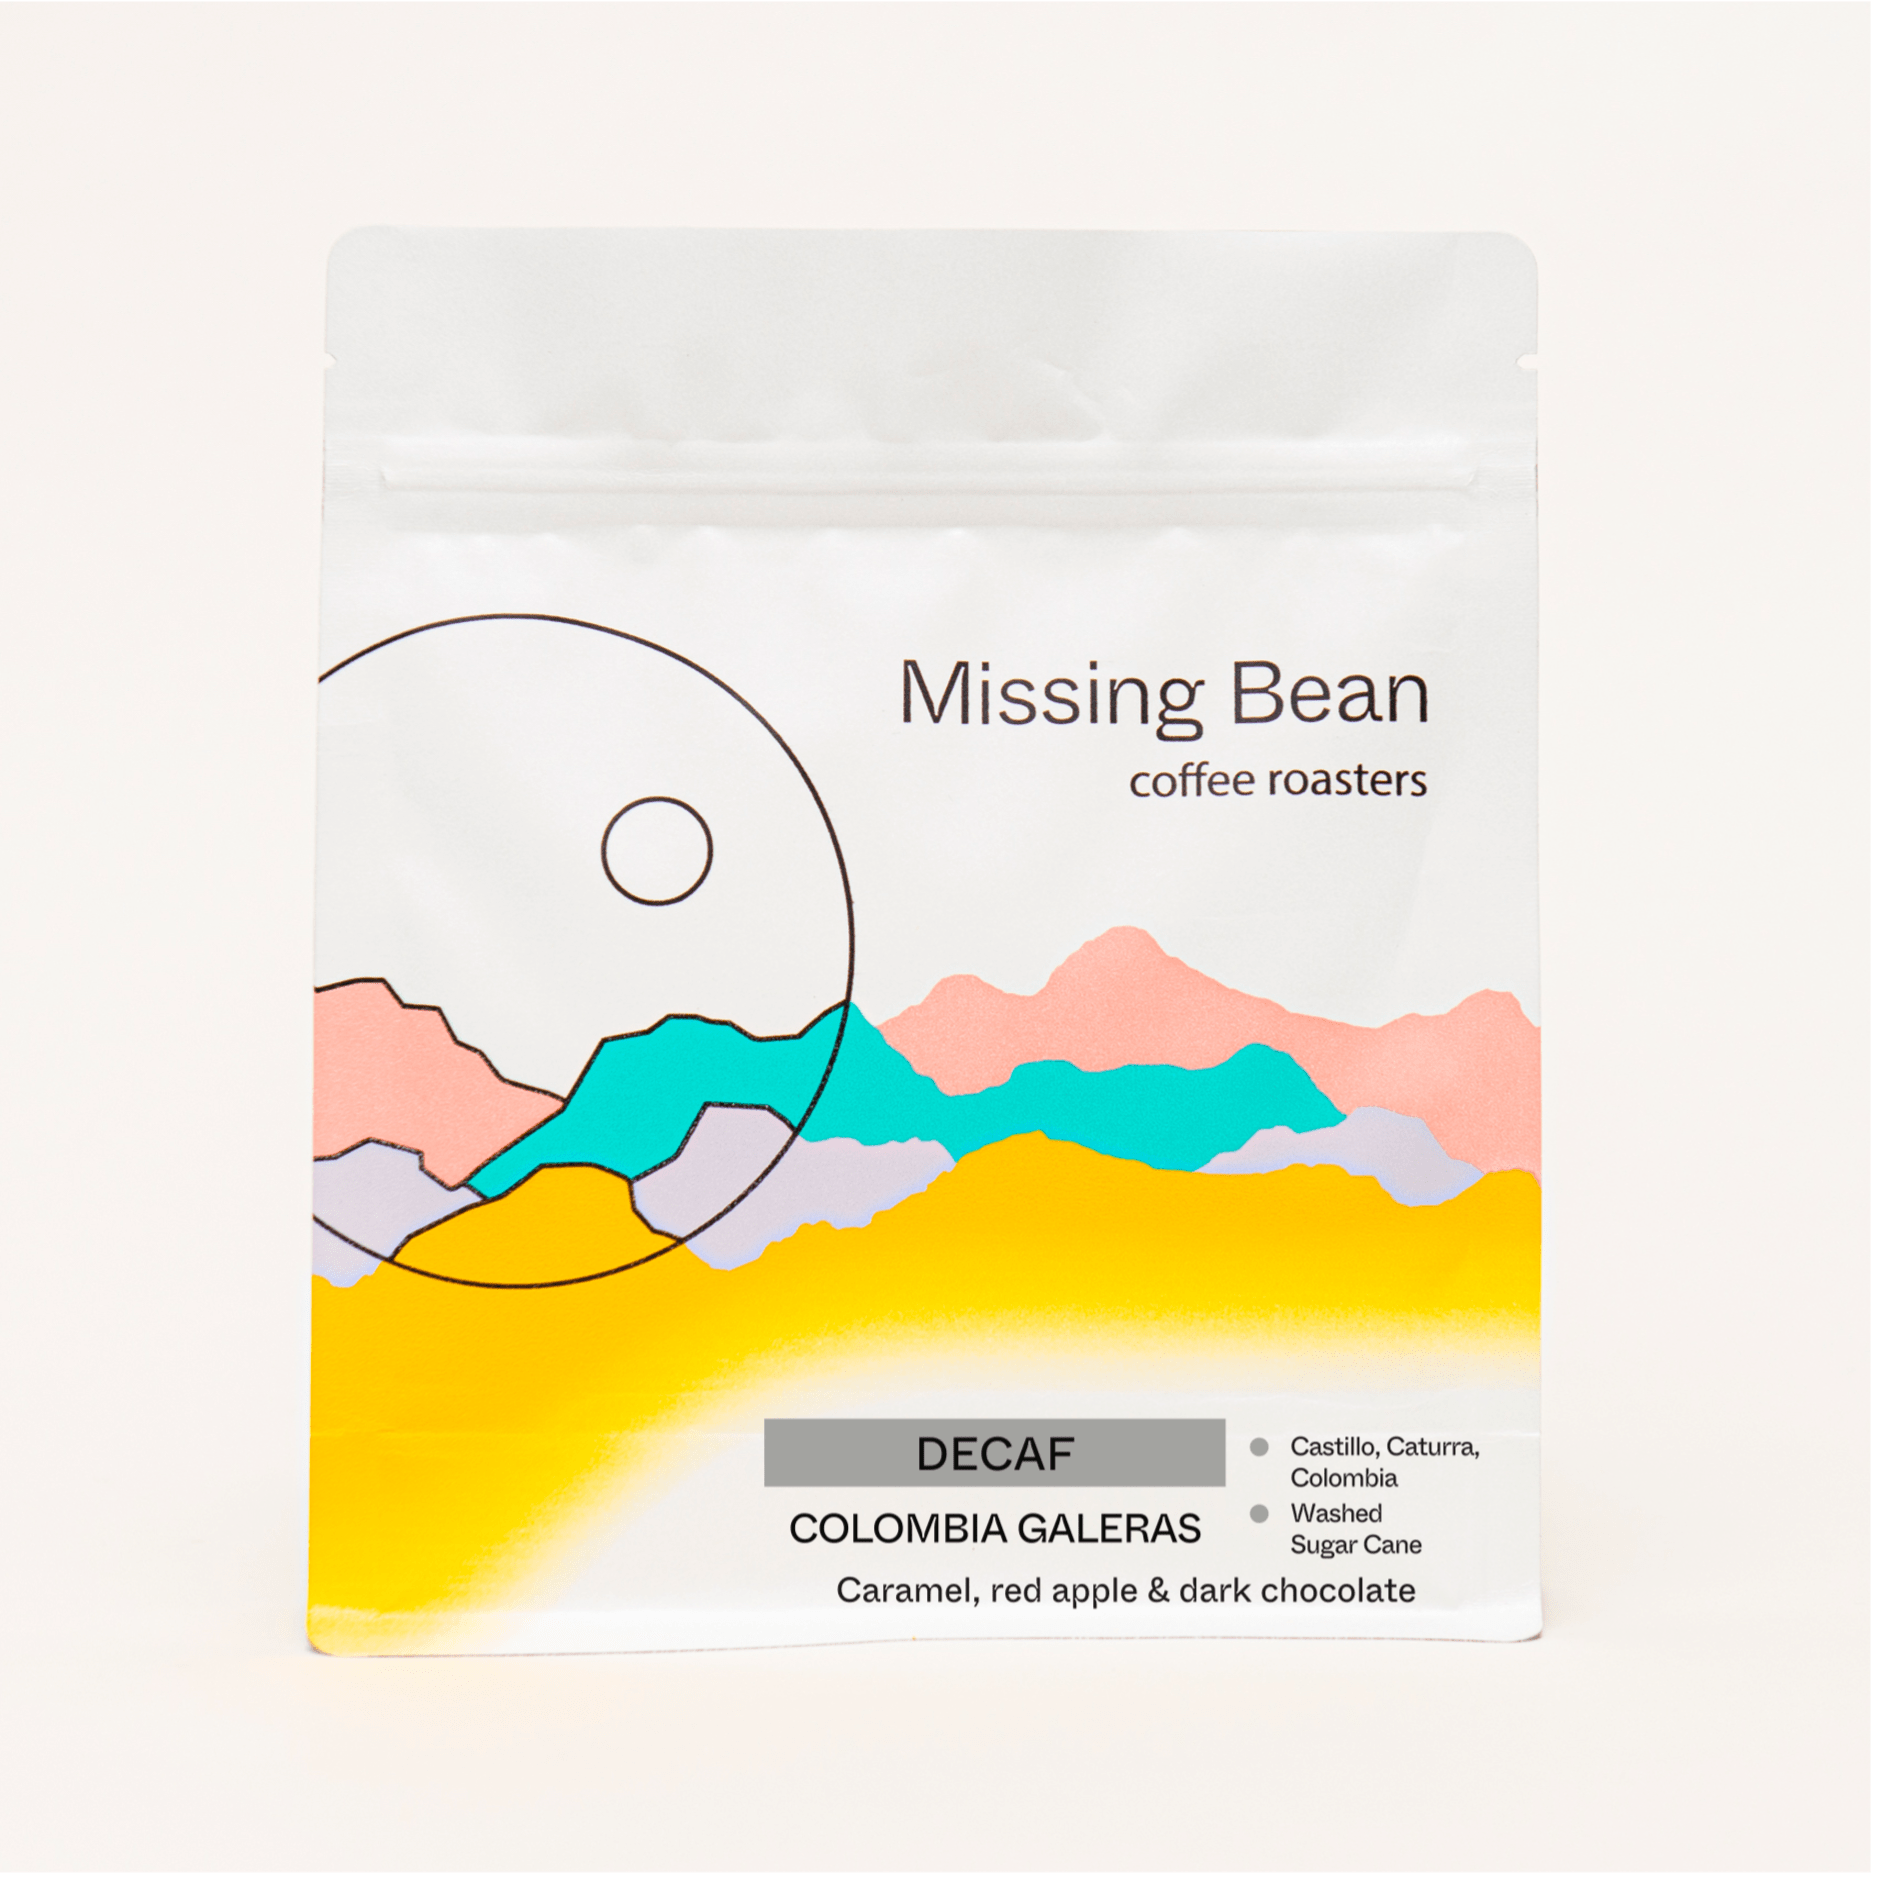 A bag of Missing bean coffee roasters DECAF - Colombia - Galeras